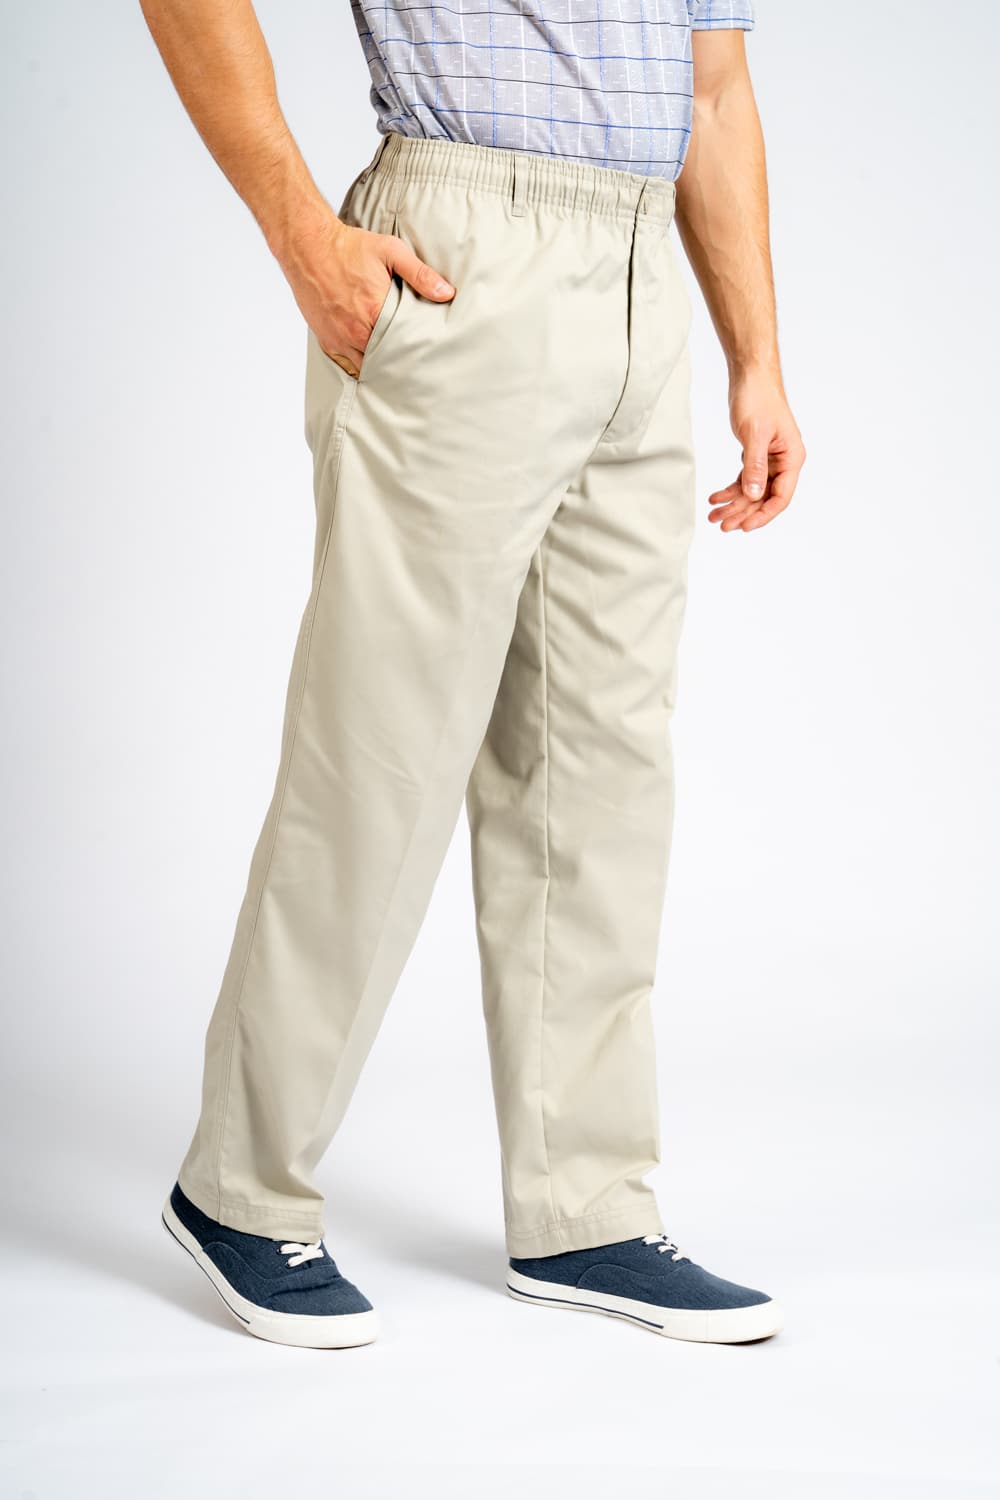 Rugby Elasticated Waist Trouser In Stone